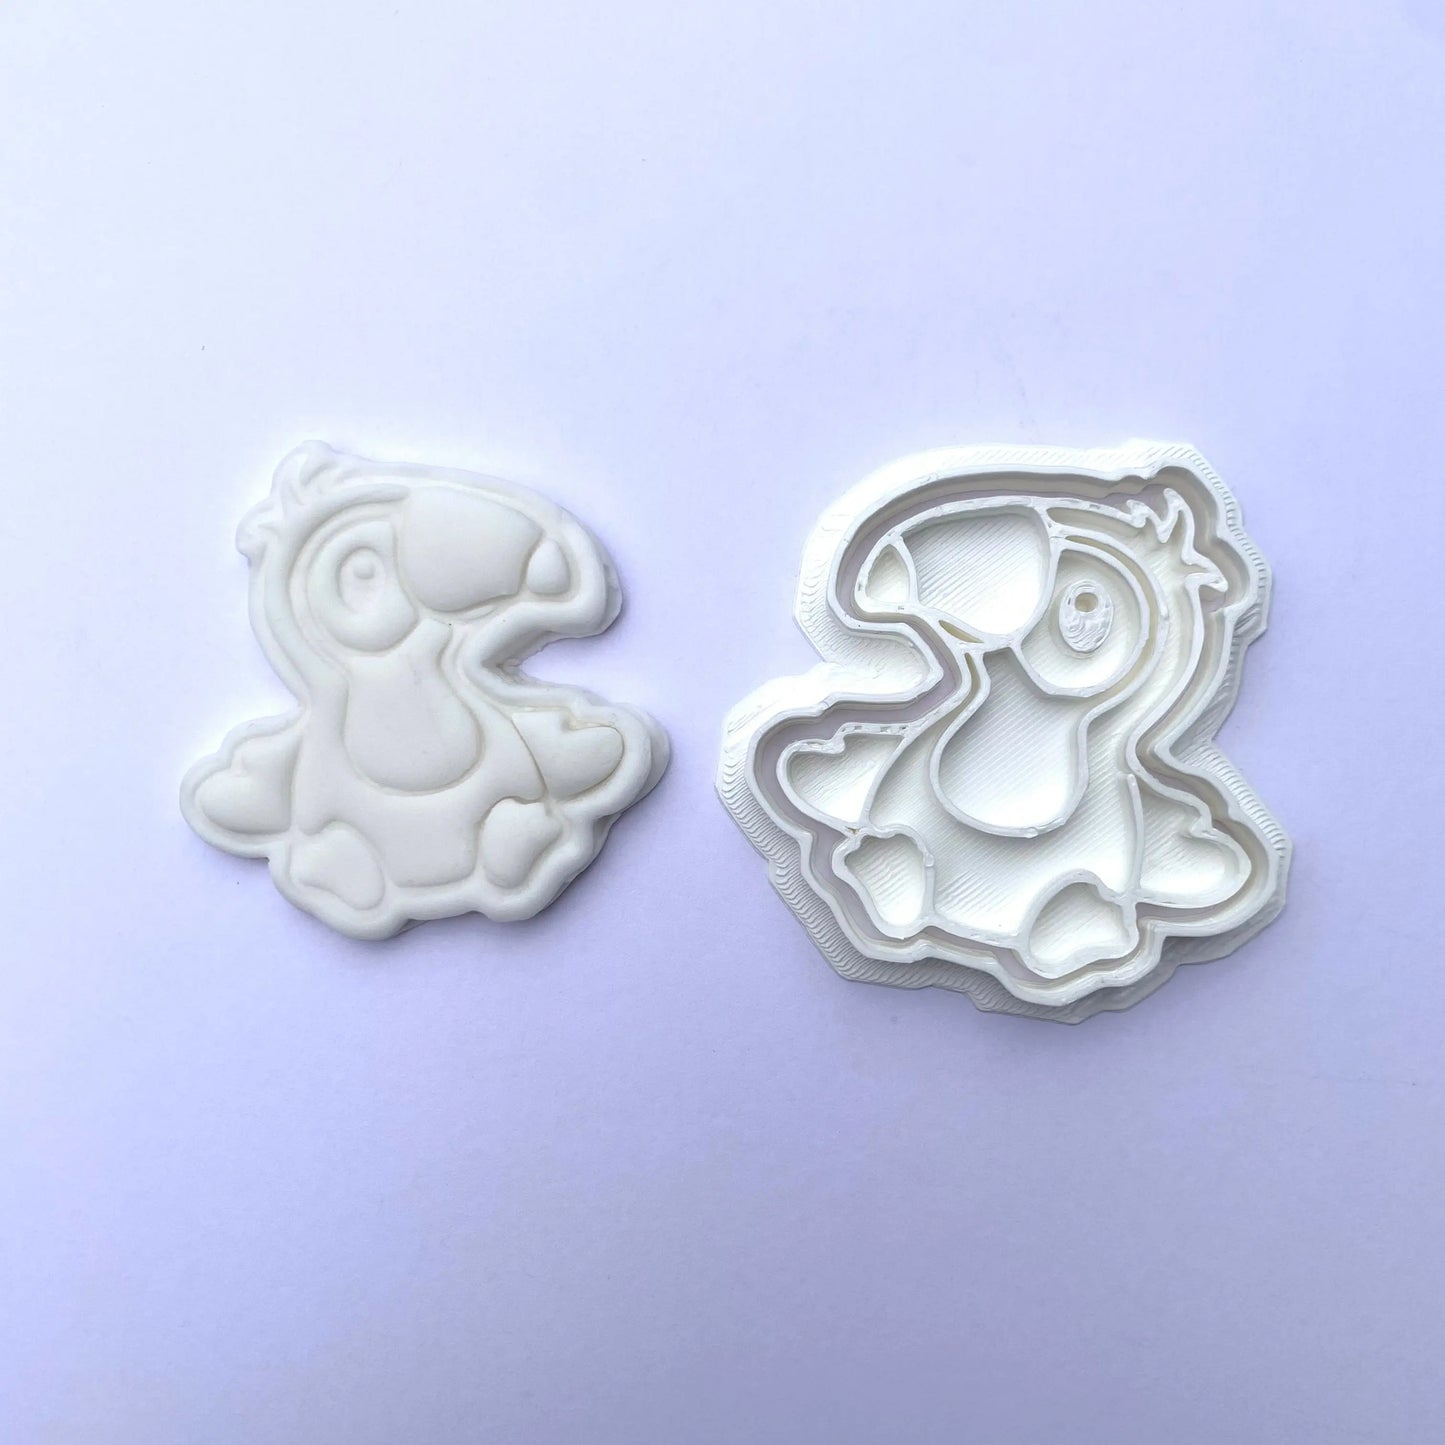 Parrot - animal - cookie cutter + stamp MEG cookie cutters